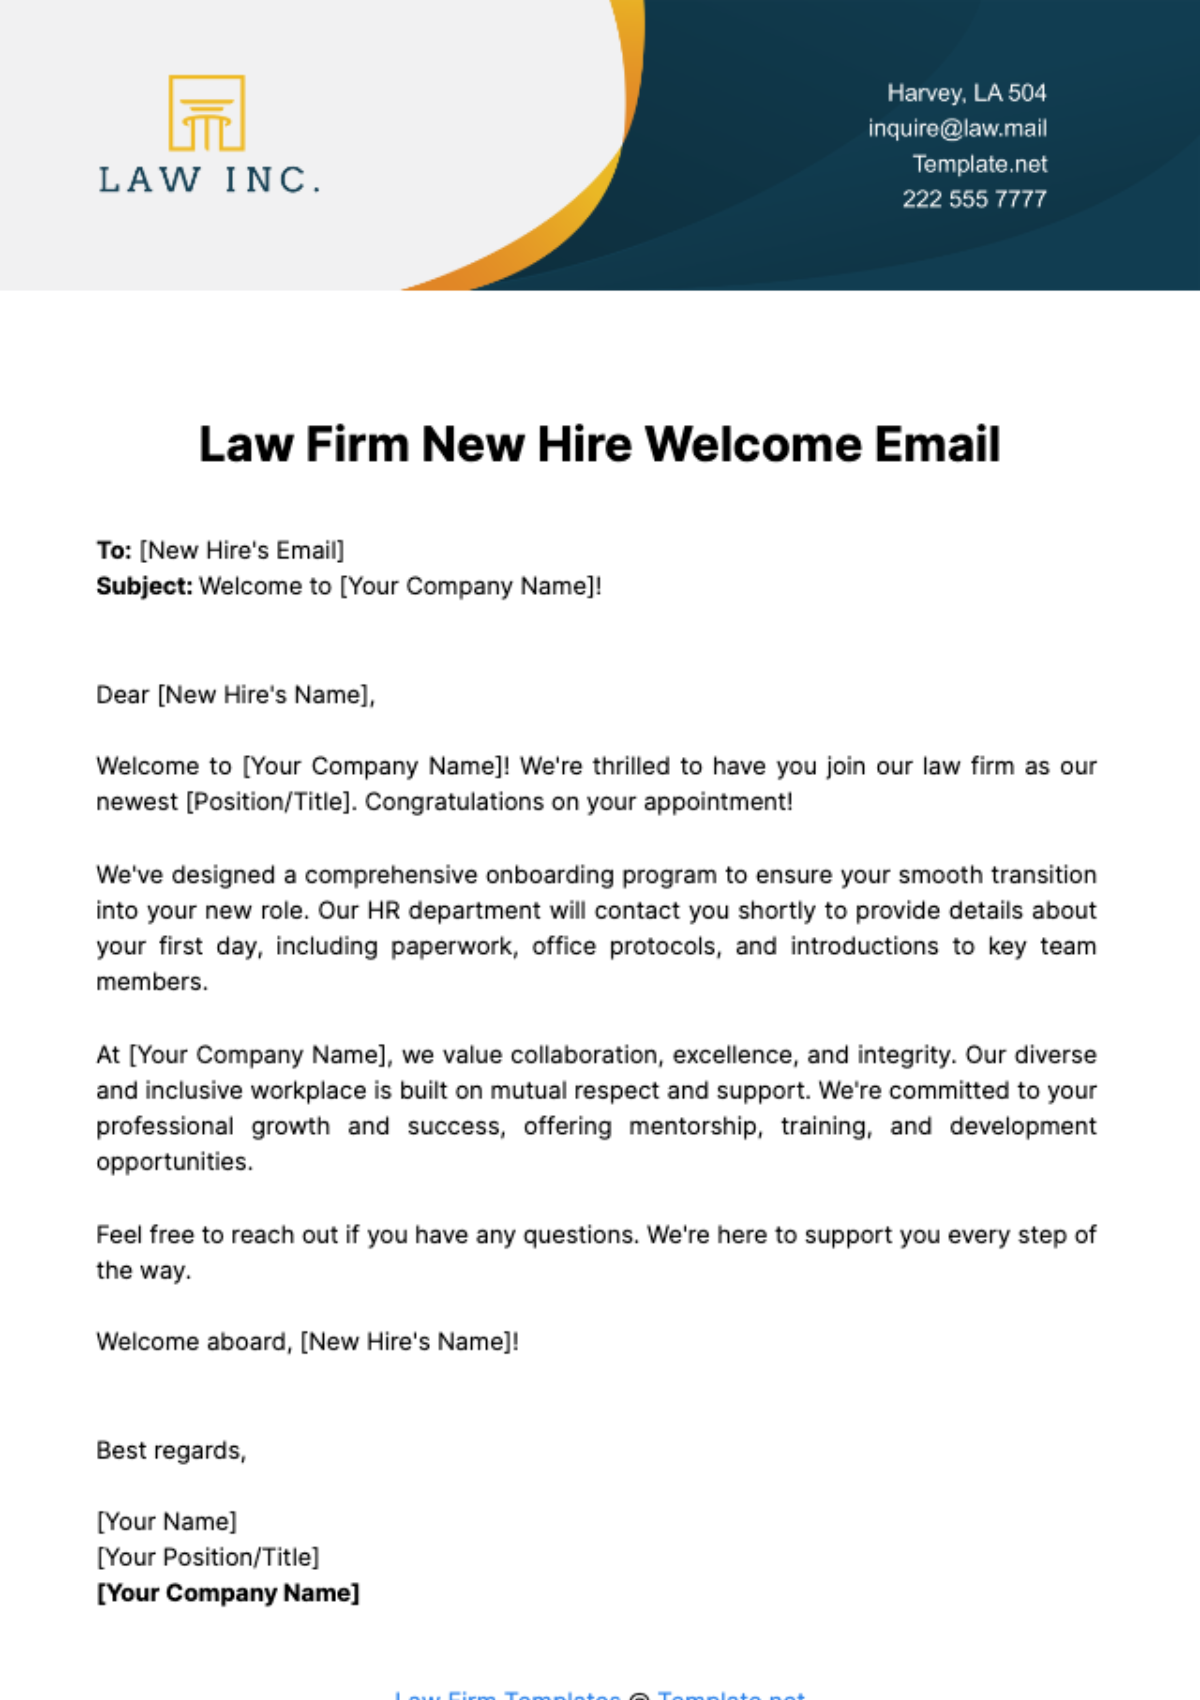 Law Firm New Hire Welcome Email Template